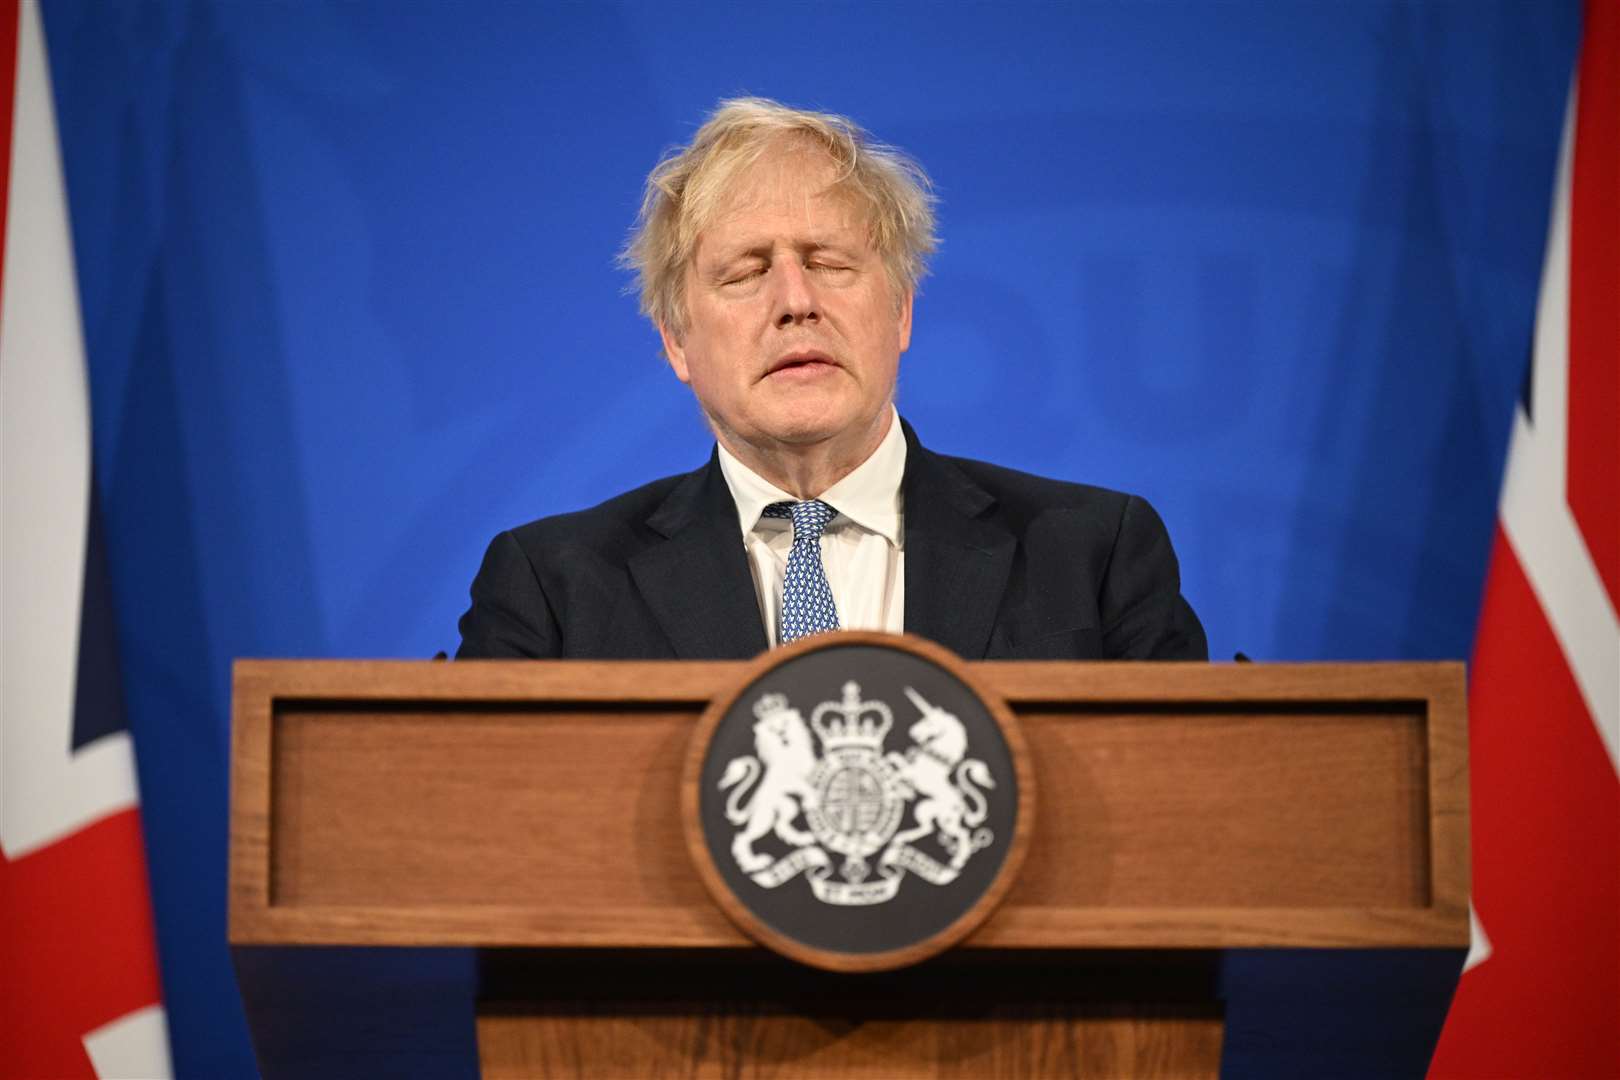 Boris Johnson during a press conference in May following the publication of Sue Gray’s report into Downing Street parties in Whitehall during the coronavirus lockdown (Leon Neal/PA)